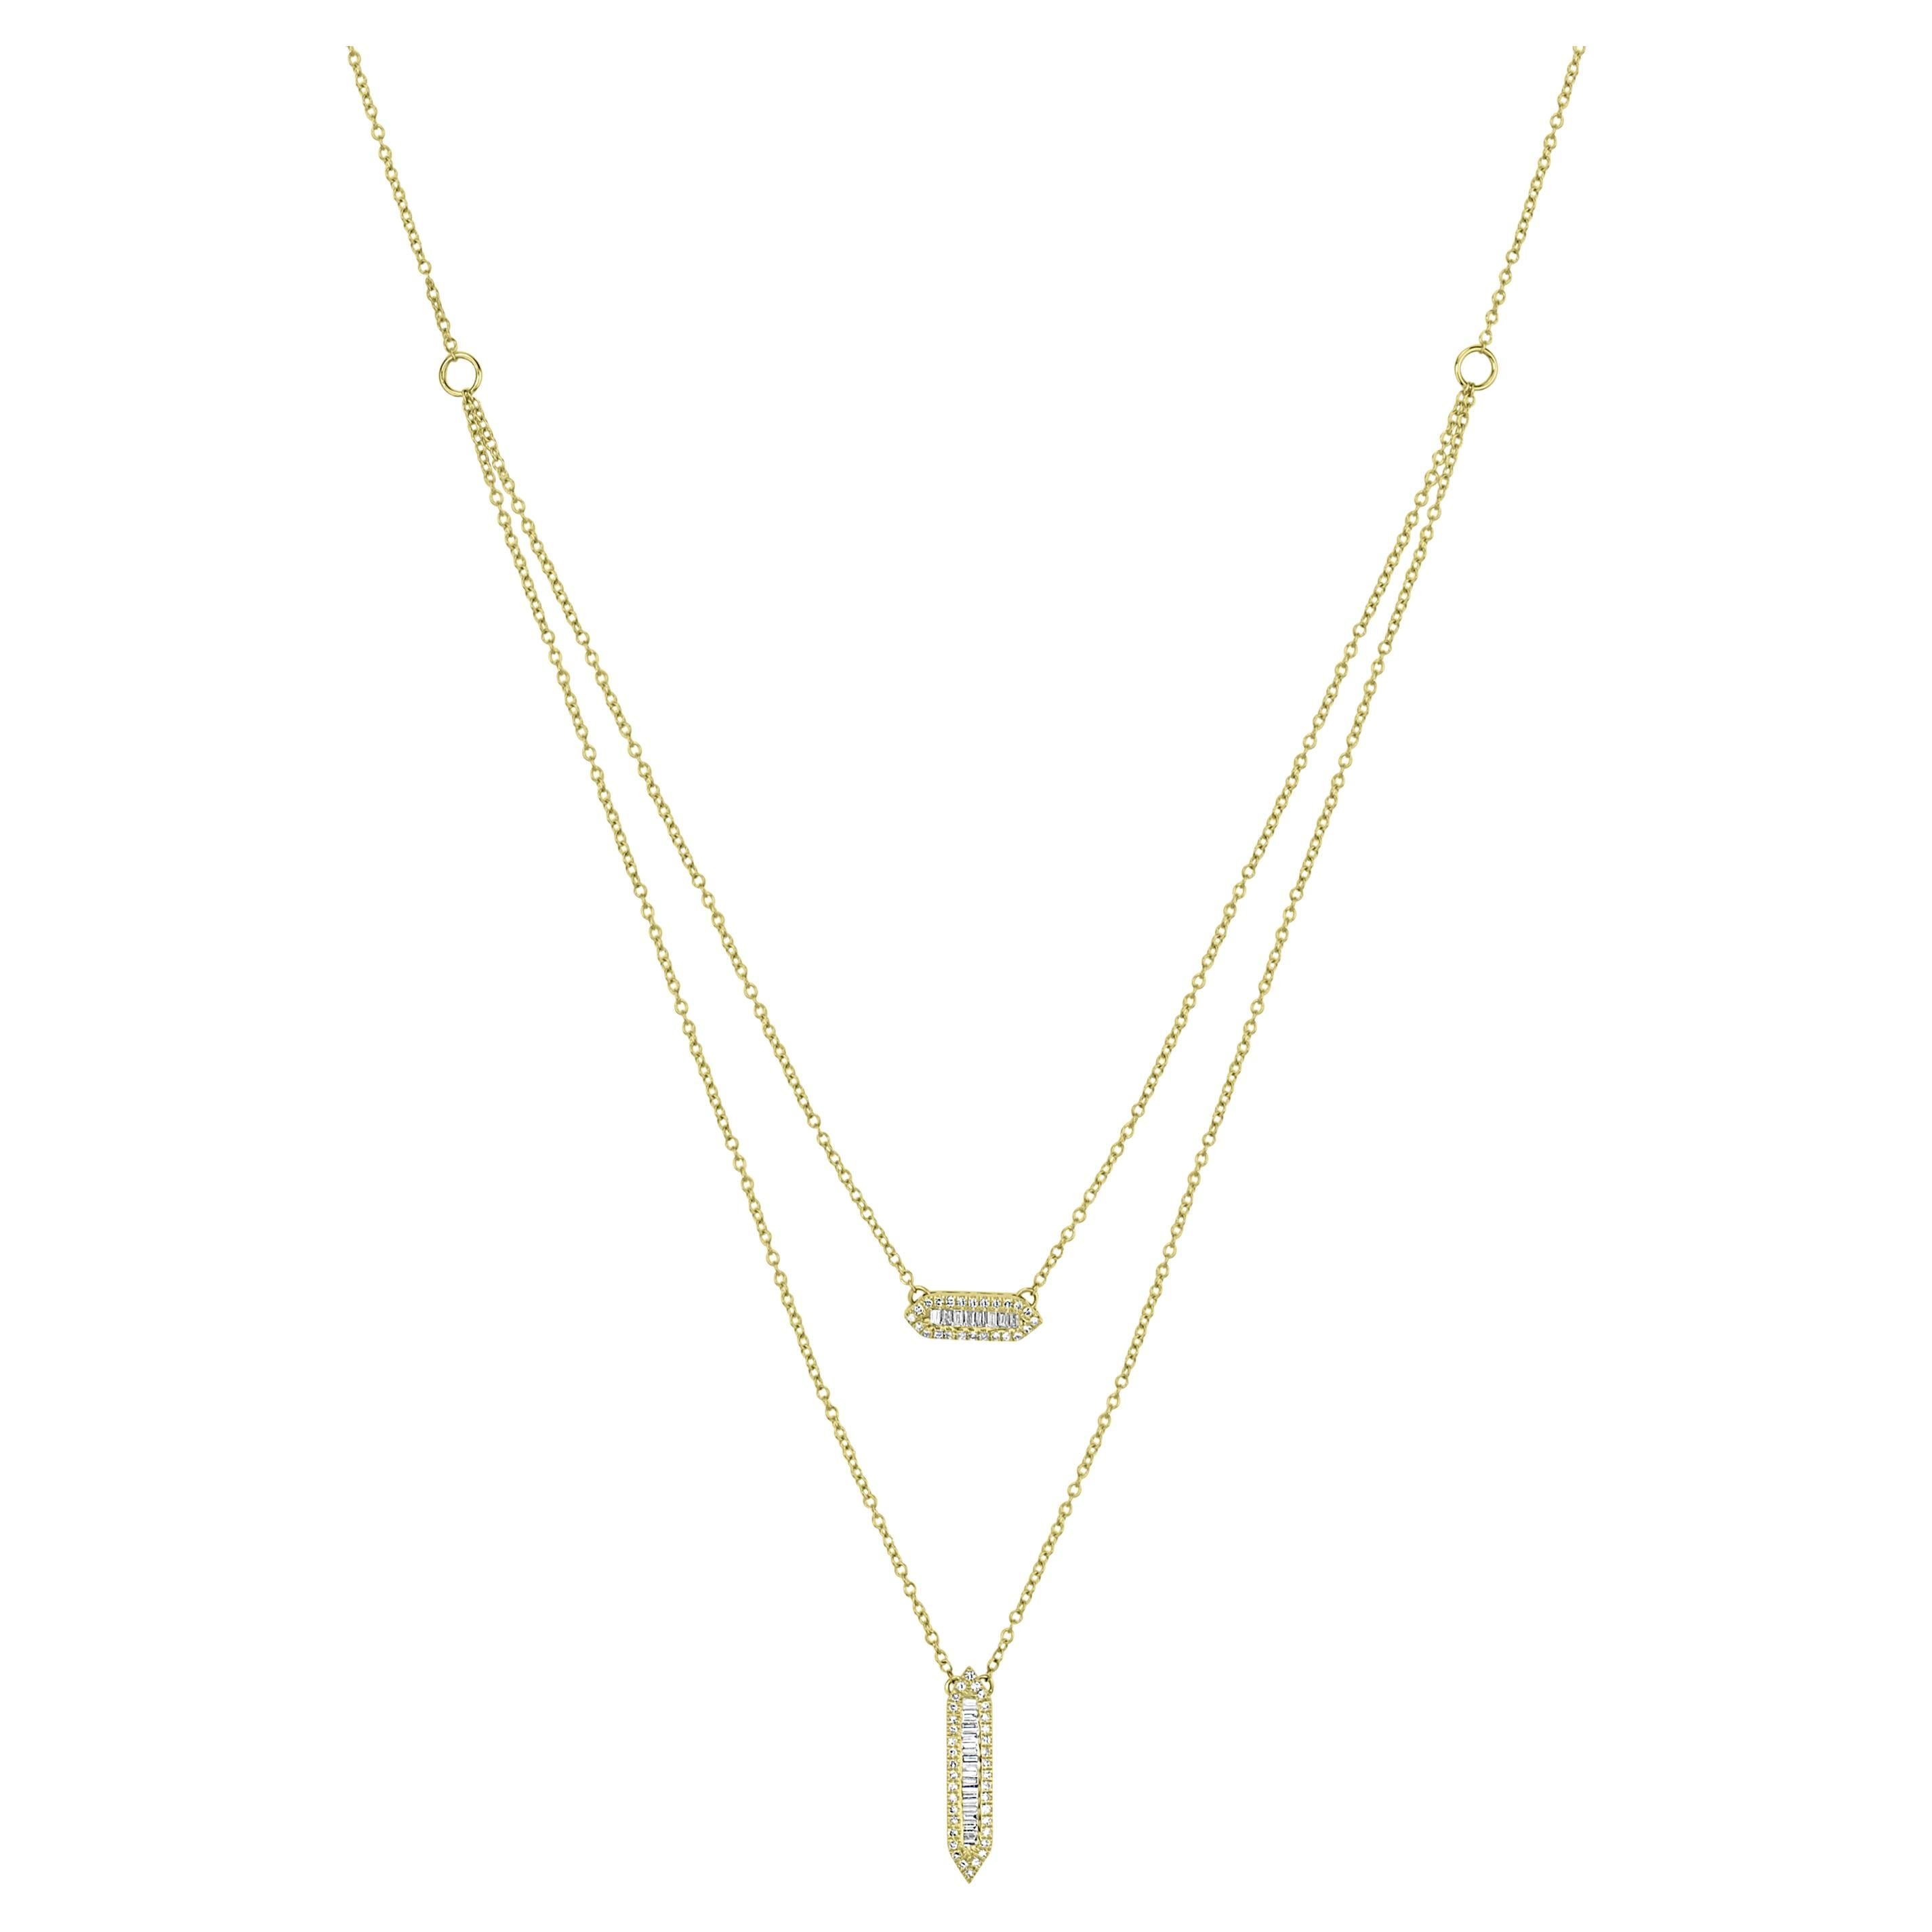 Luxle 0.65 Ct. T.W Diamond Multi Row Necklace in 14k Yellow Gold For Sale